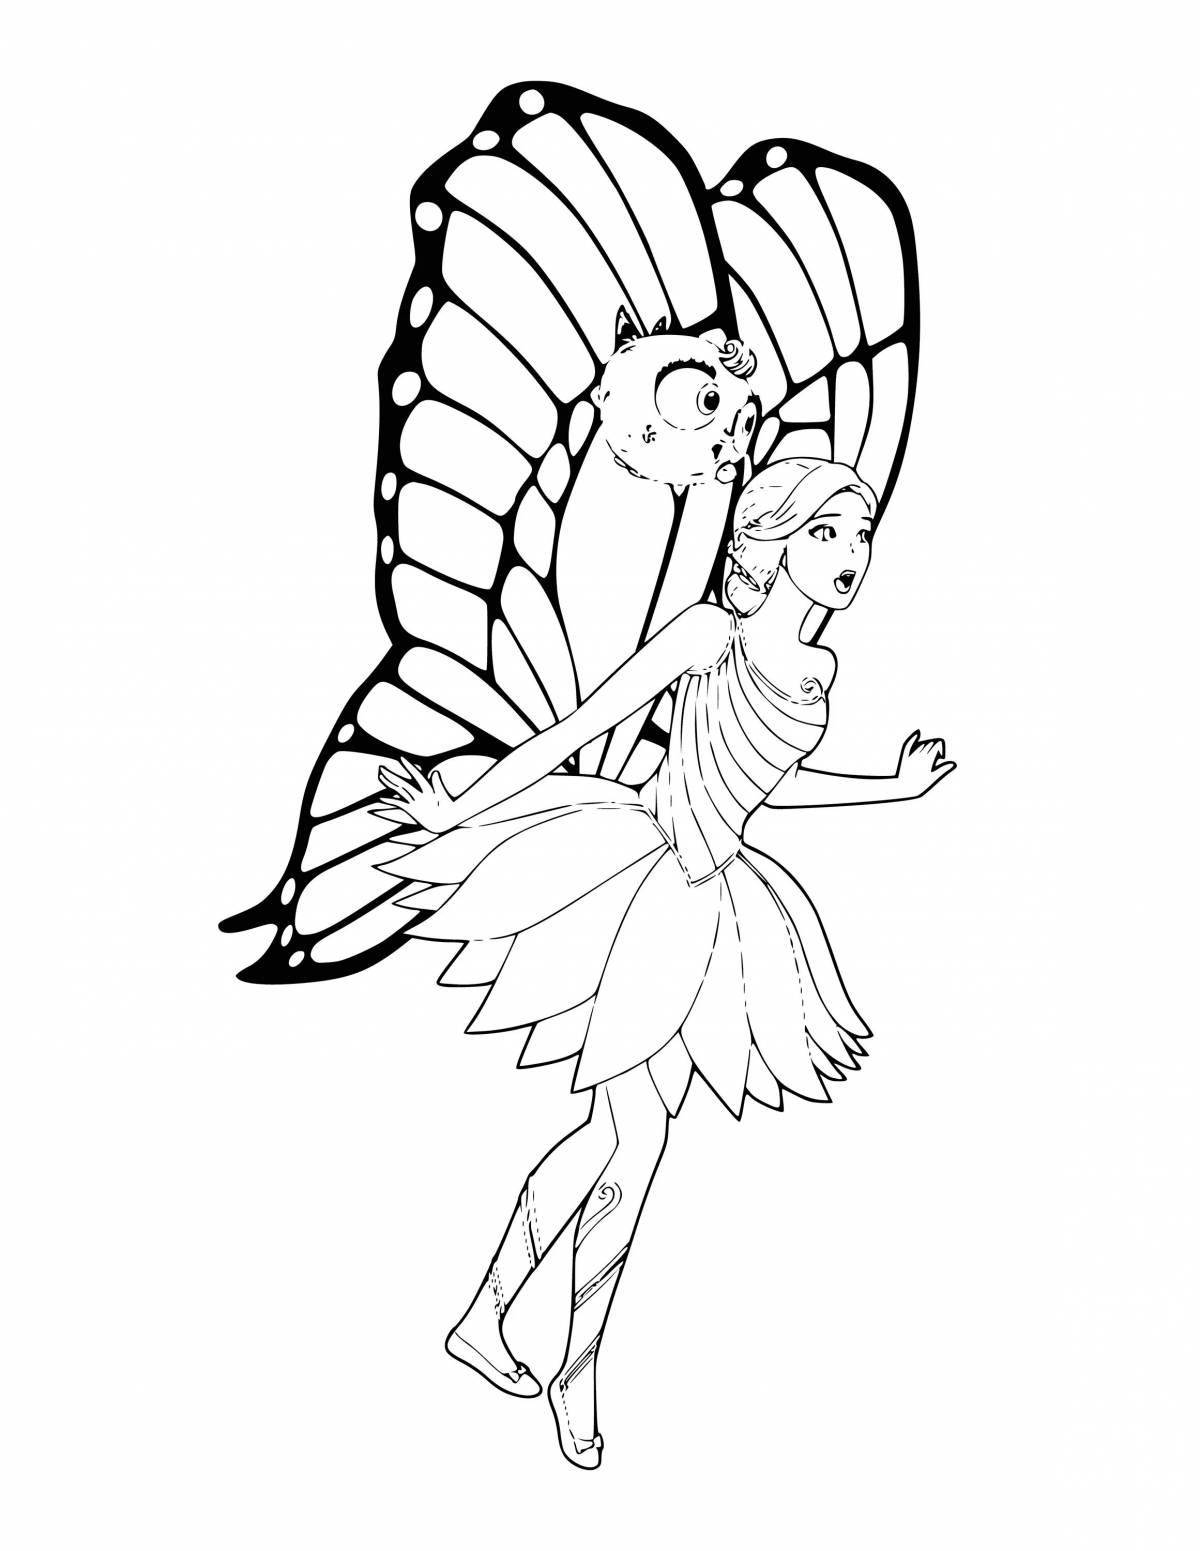 Awesome fairy barbie coloring page